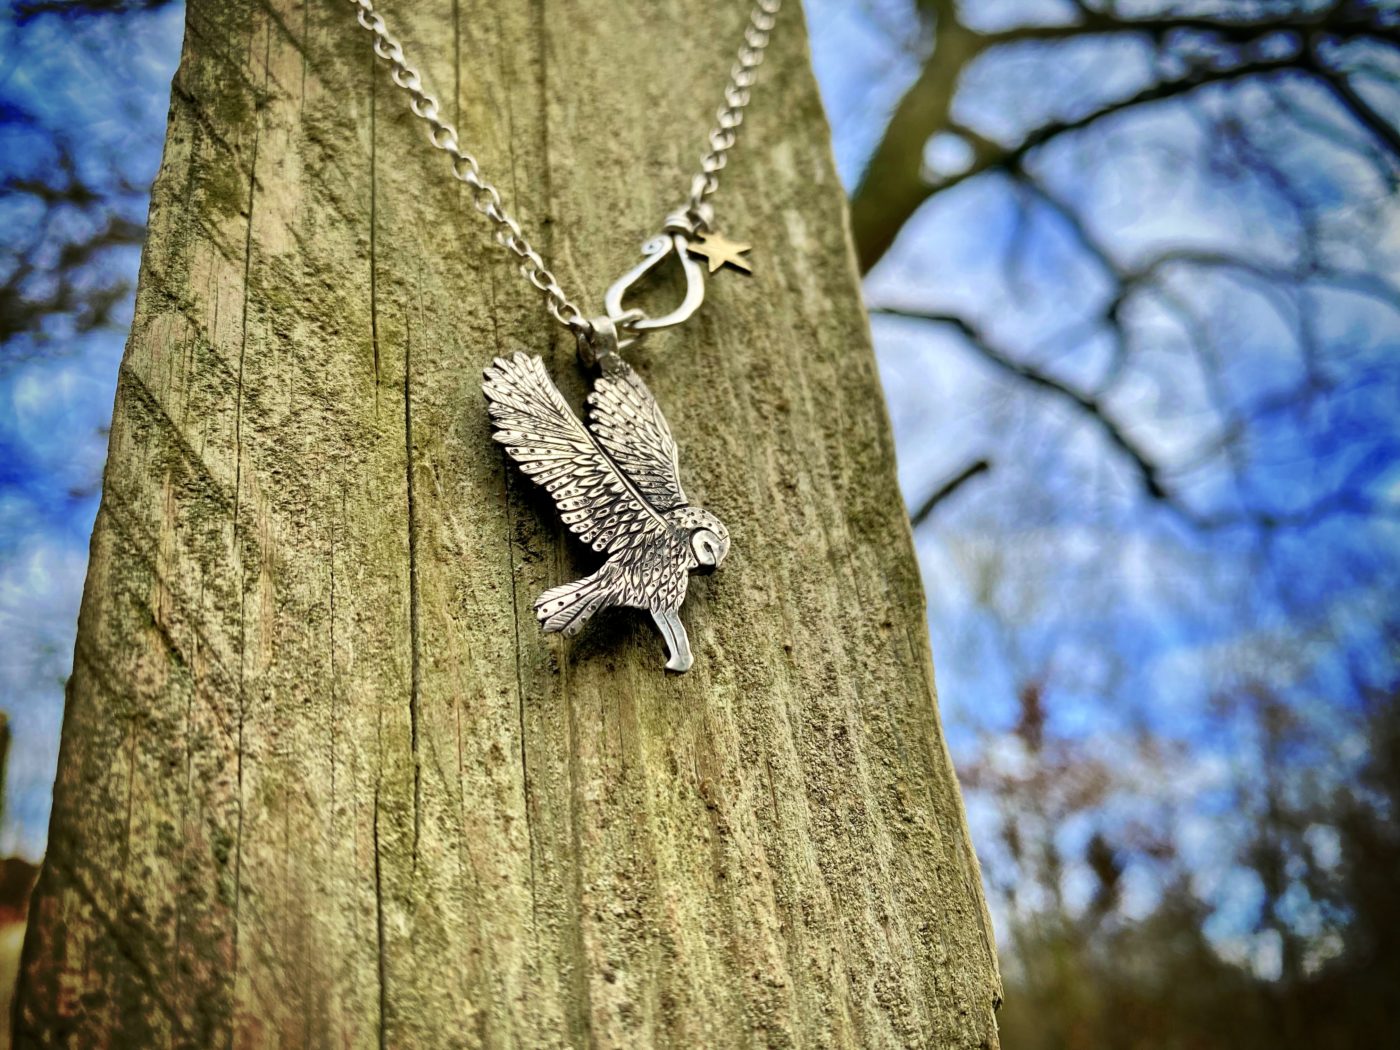 owl jewellery handmade and etically created using only recycled sterling silver